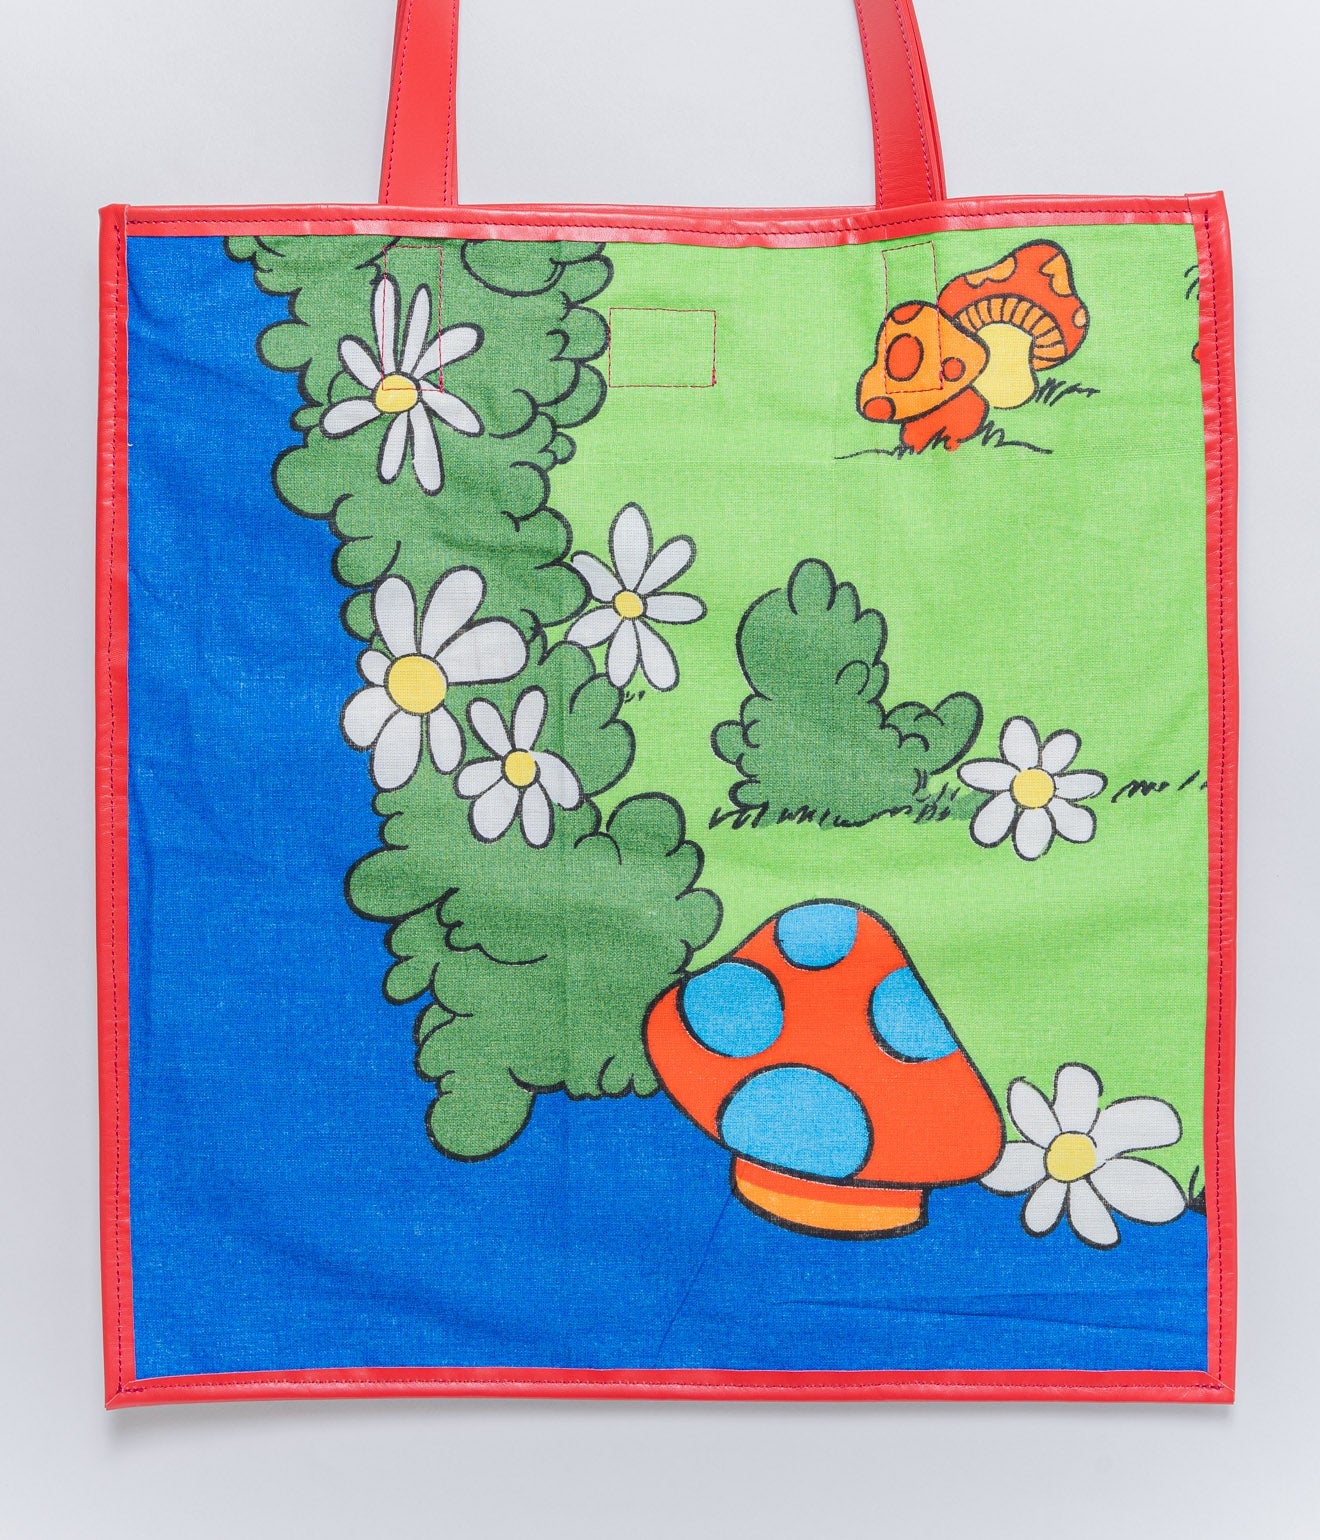 WEAREALLANIMALS UPCYCLE ”Piping Flat Tote -Vintage Smurf Fabric-" #11 - WEAREALLANIMALS